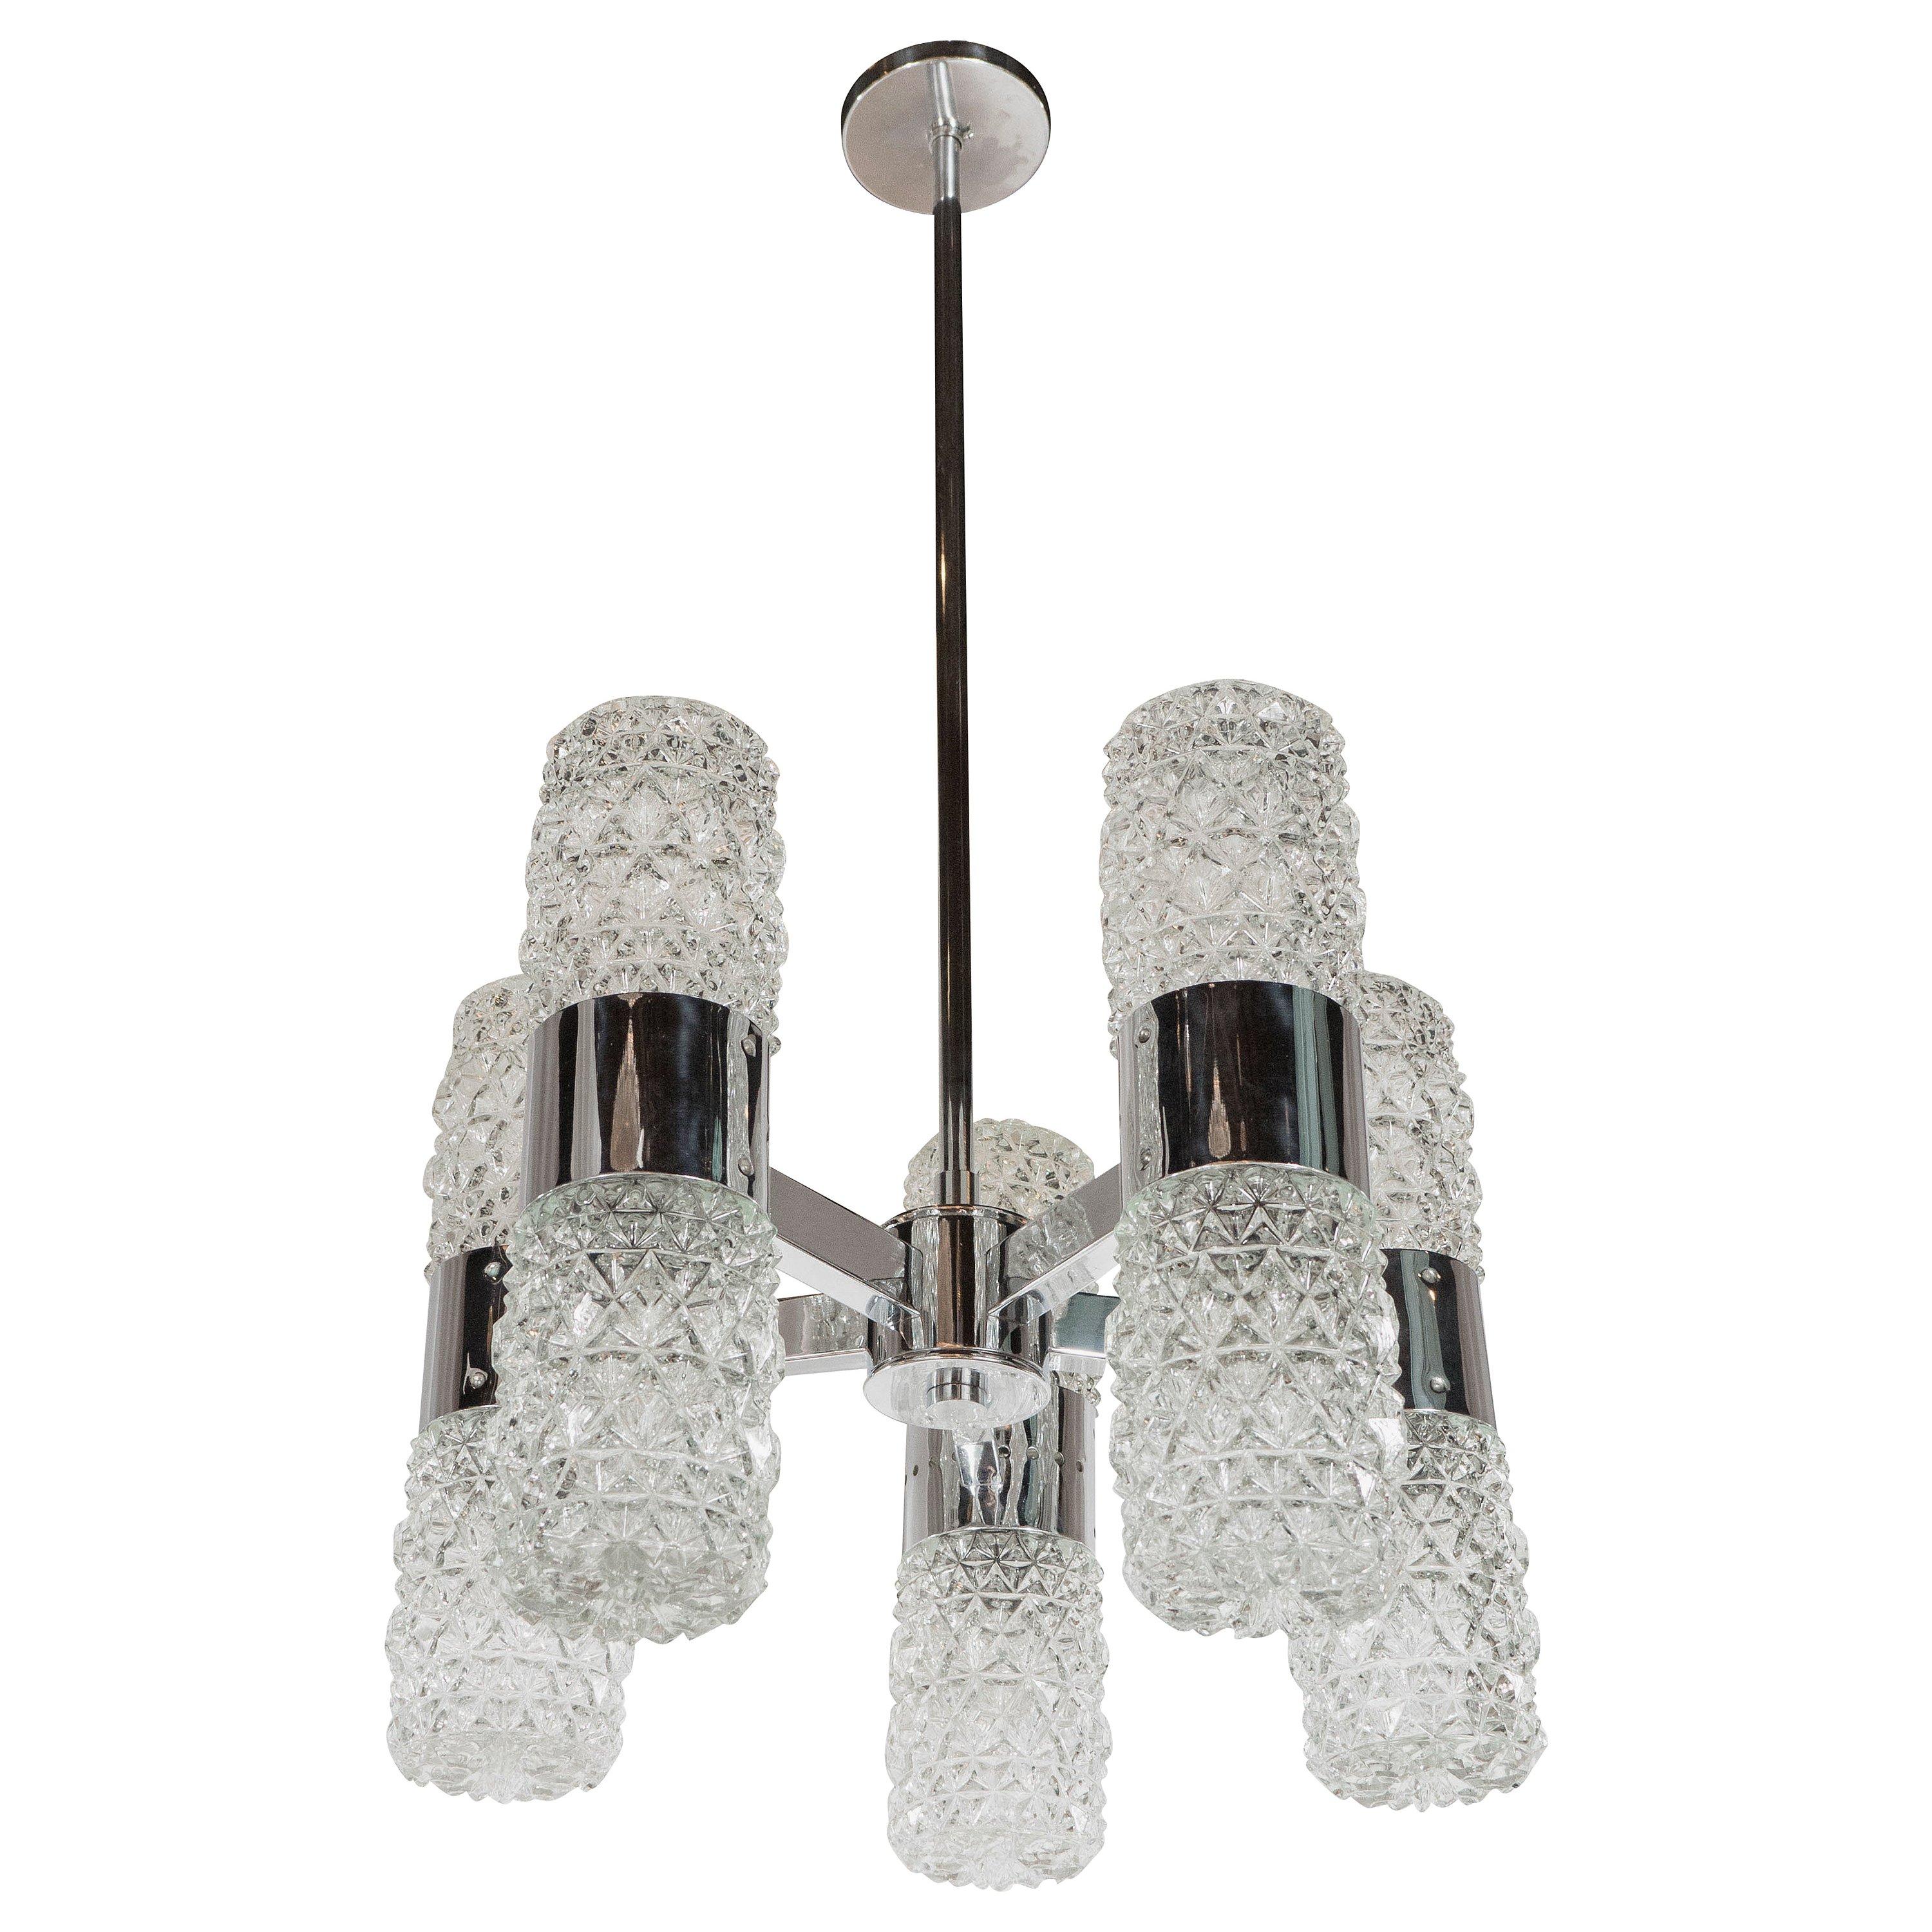 Mid-Century Modernist Chandelier by Kinkeldey in Chrome and Textured Glass For Sale